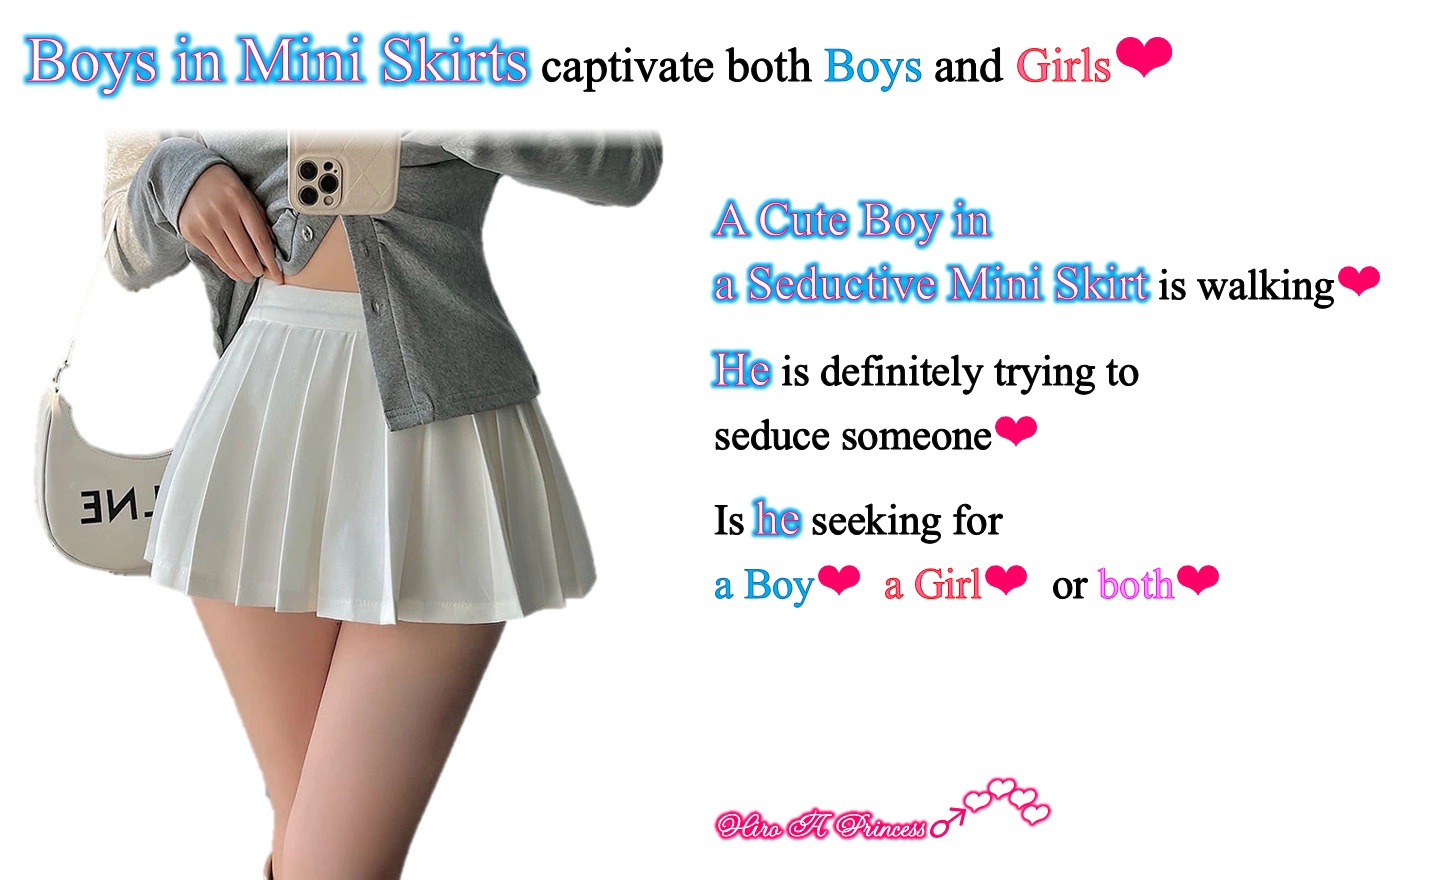 Boys in Mini Skirts captivate both Boys and Girls E